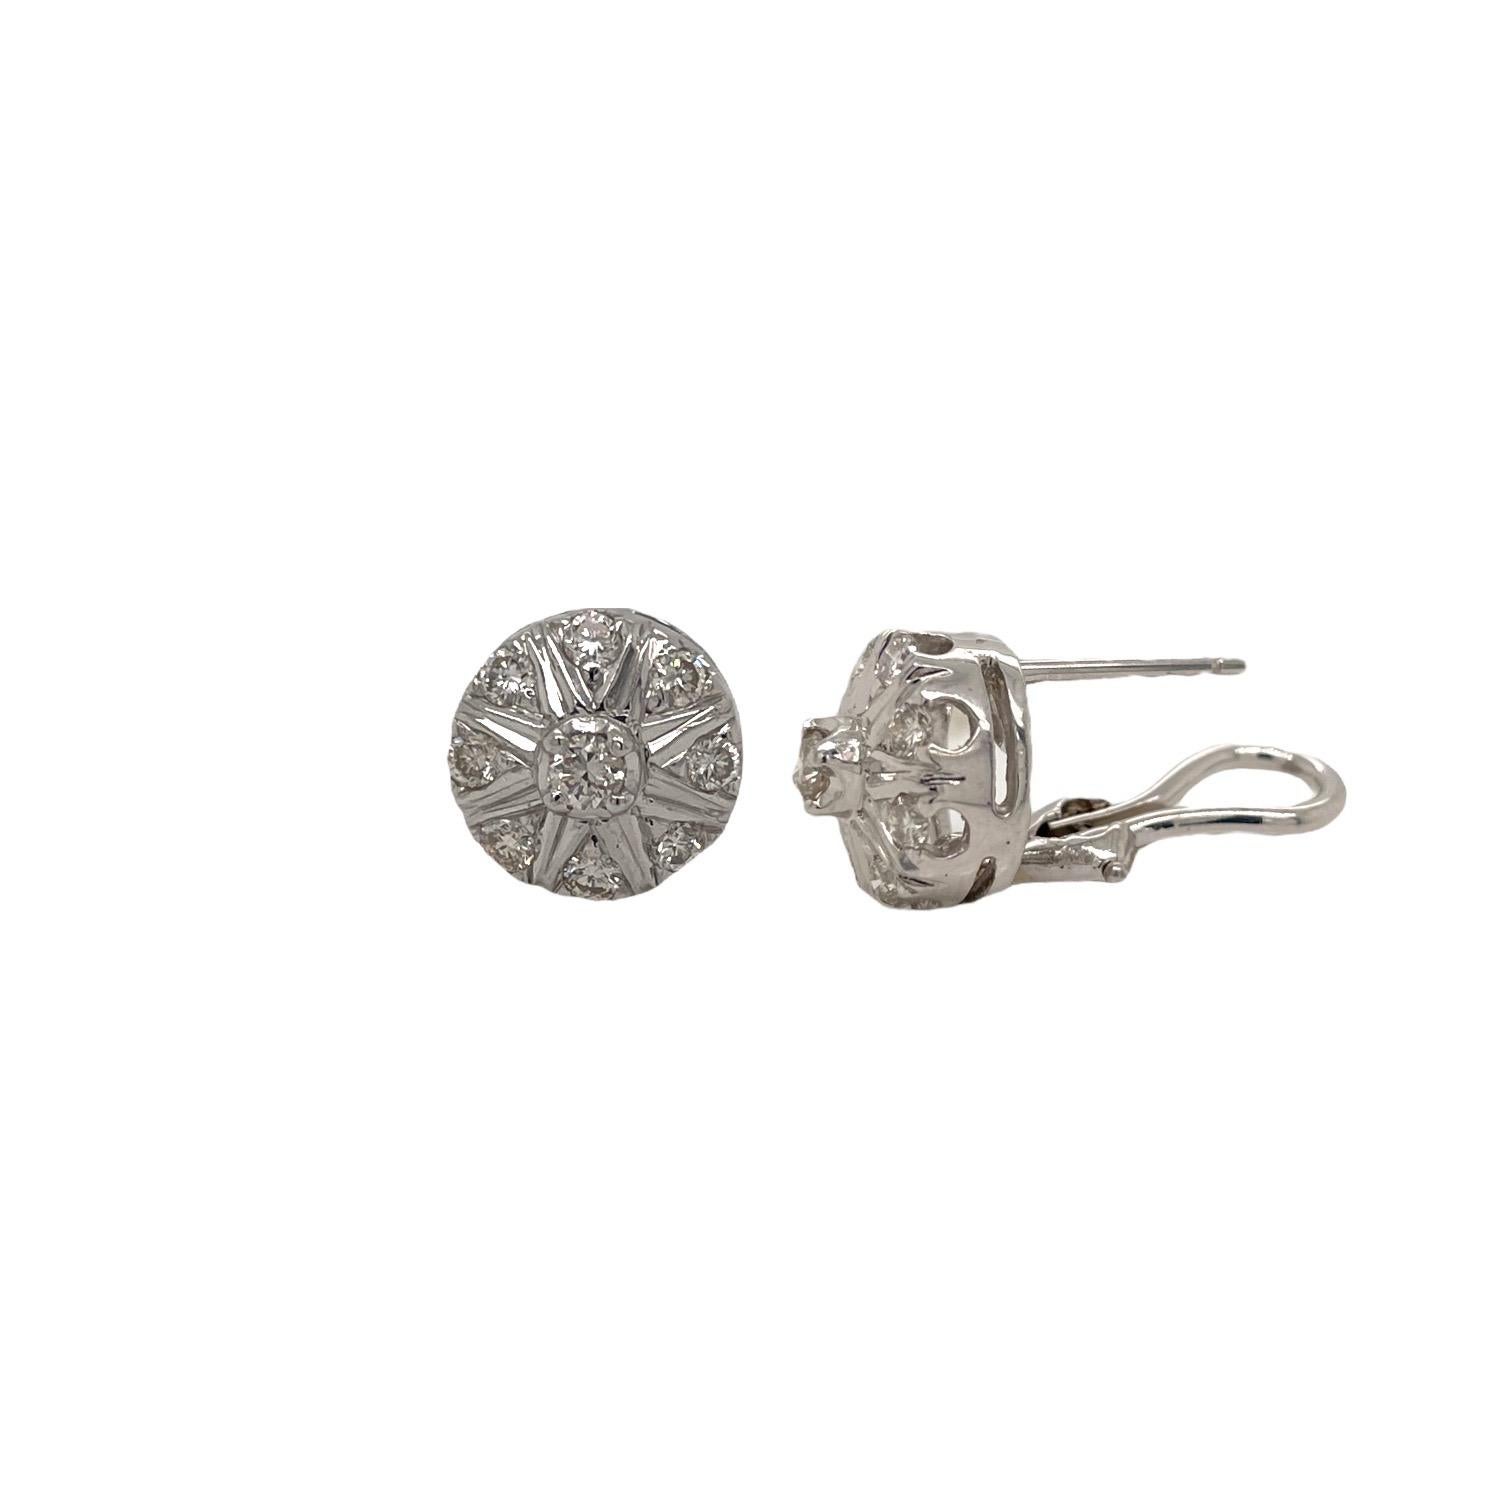 Vintage style earrings are in 18k white gold and contain round brilliant diamonds, approximately 0.50cts. Diamonds are G in color and SI1 in clarity. Earring measures approximately 11mm and contains a post French clip closure. Earring weighs